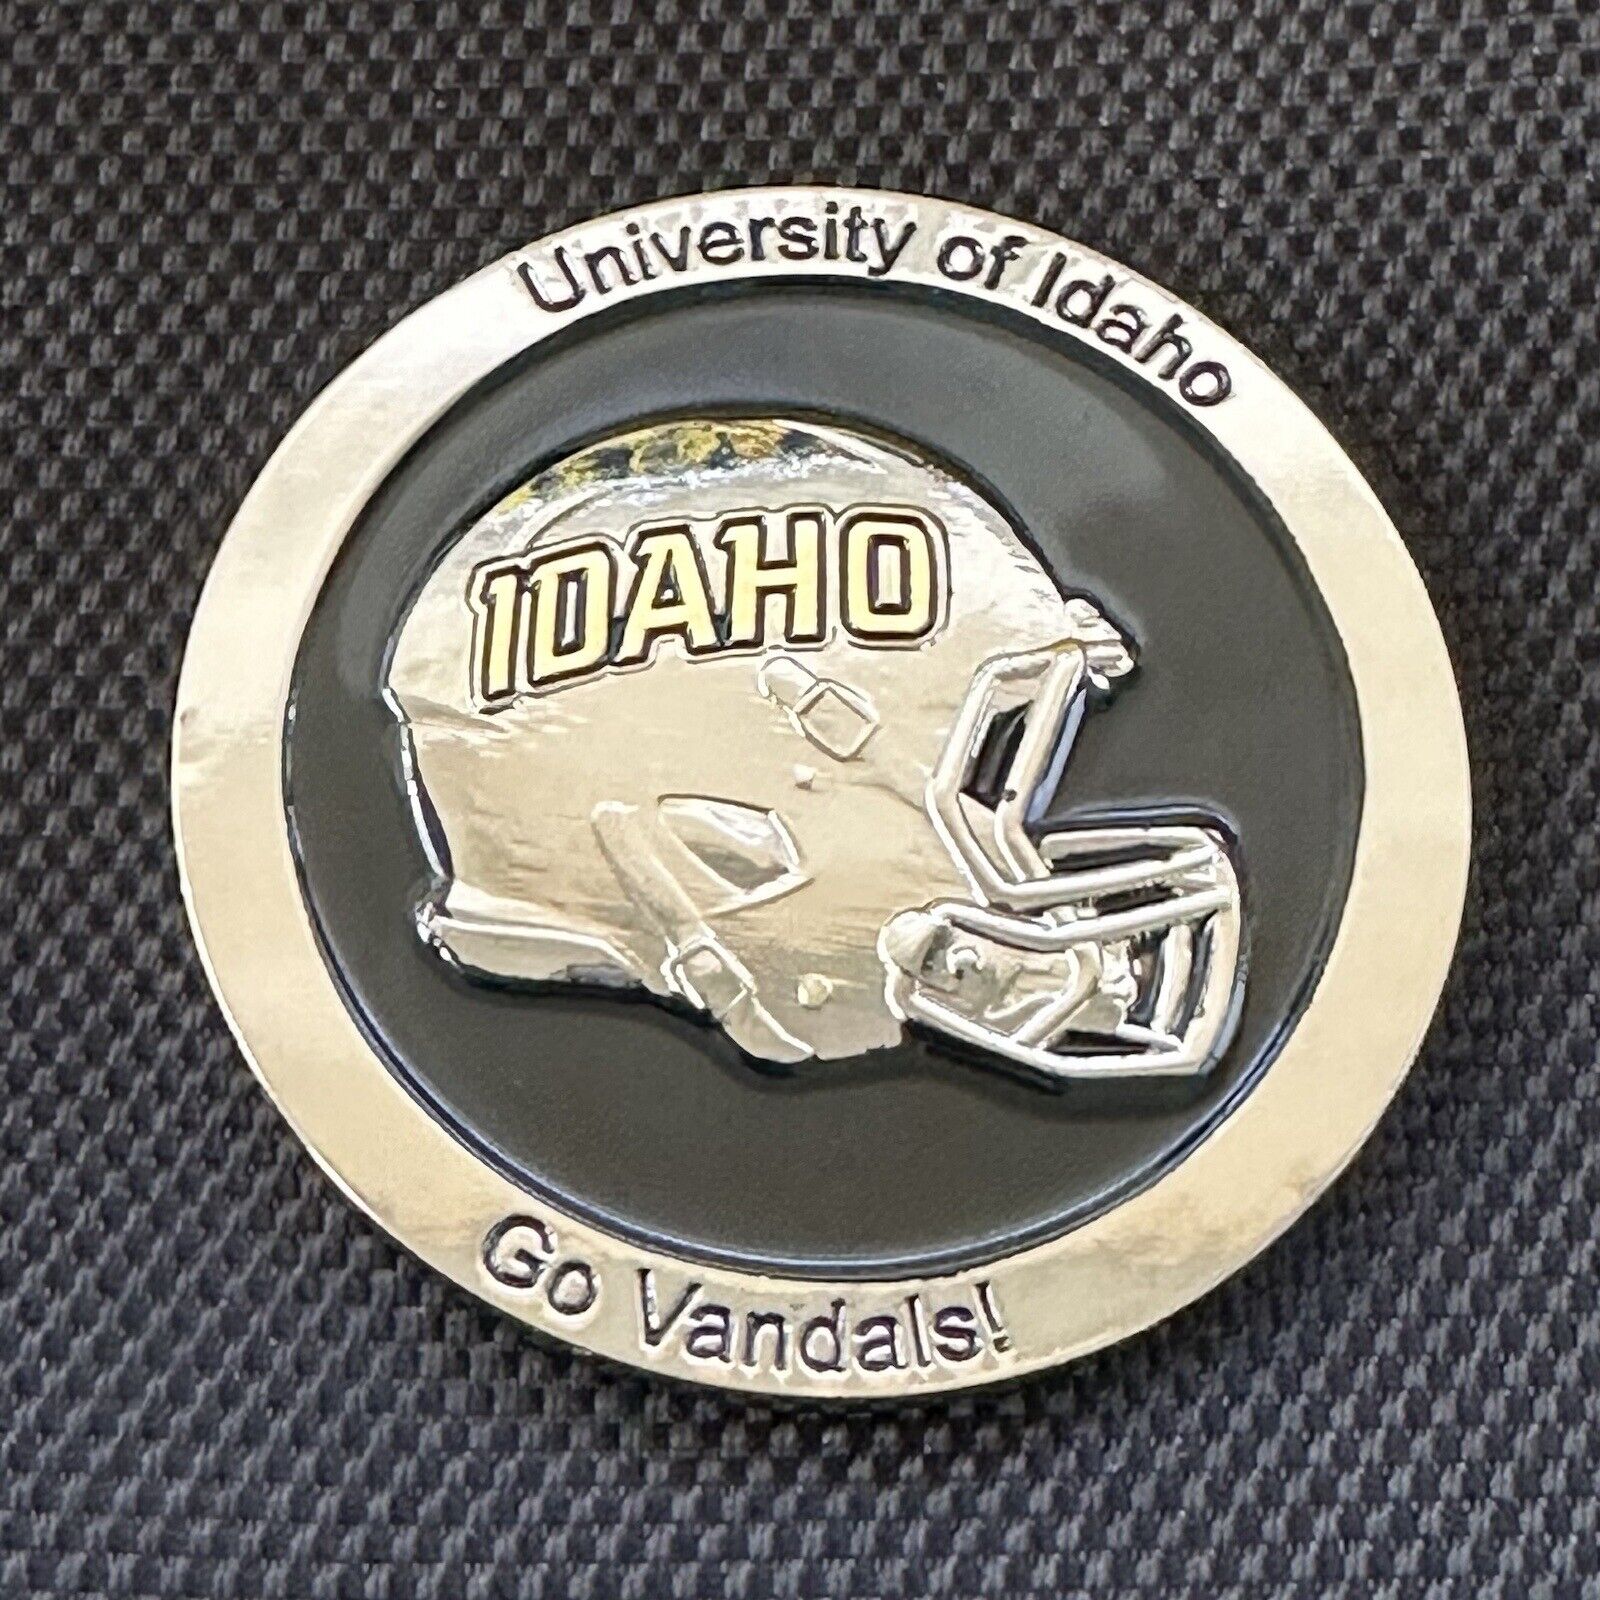 University of Idaho MOSCOW POLICE Challenge Coin